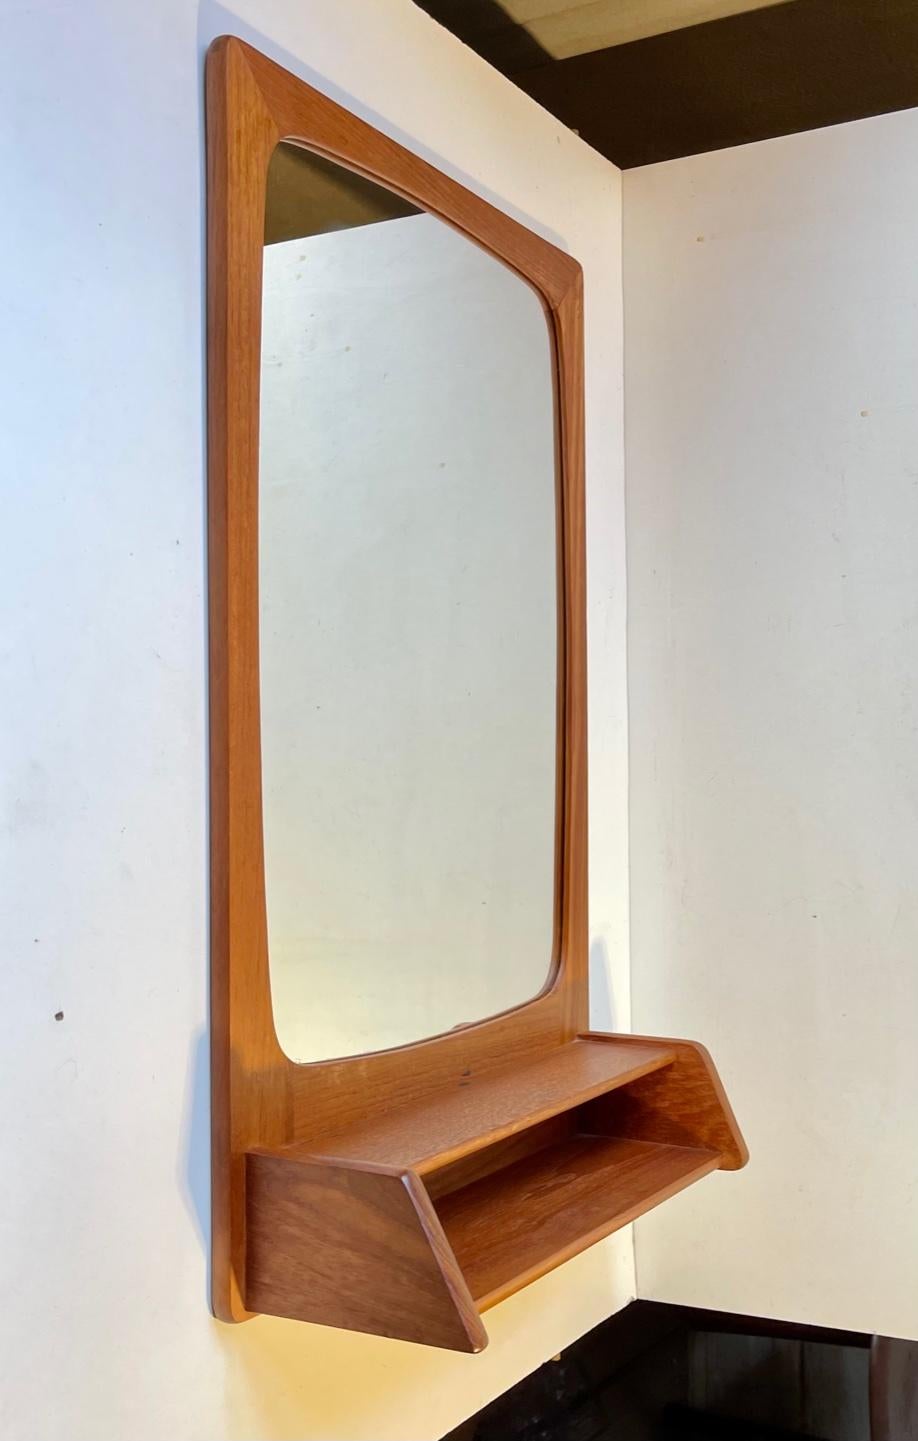 Small well made framed wall mirror with underlying shelf in teak. Practical in your entrance hall or wardrobe. Manufactured in Scandinavia/Denmark during the 1960s by an anonymous cabinet maker. Measurements: 53.3 x 32.5 cm.